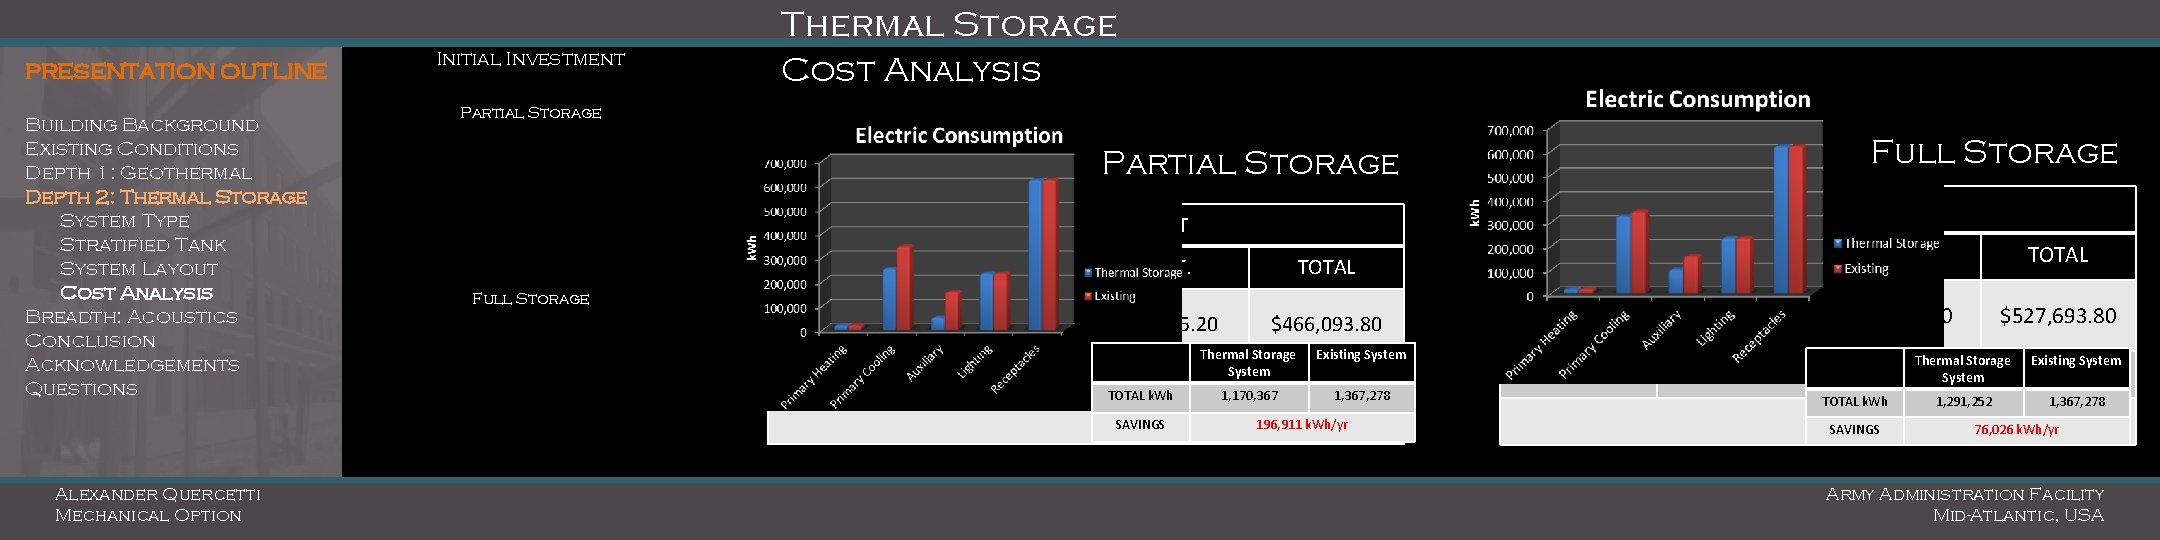 Thermal Storage PRESENTATION OUTLINE Building Background Existing Conditions Depth 1: Geothermal Depth 2: Thermal